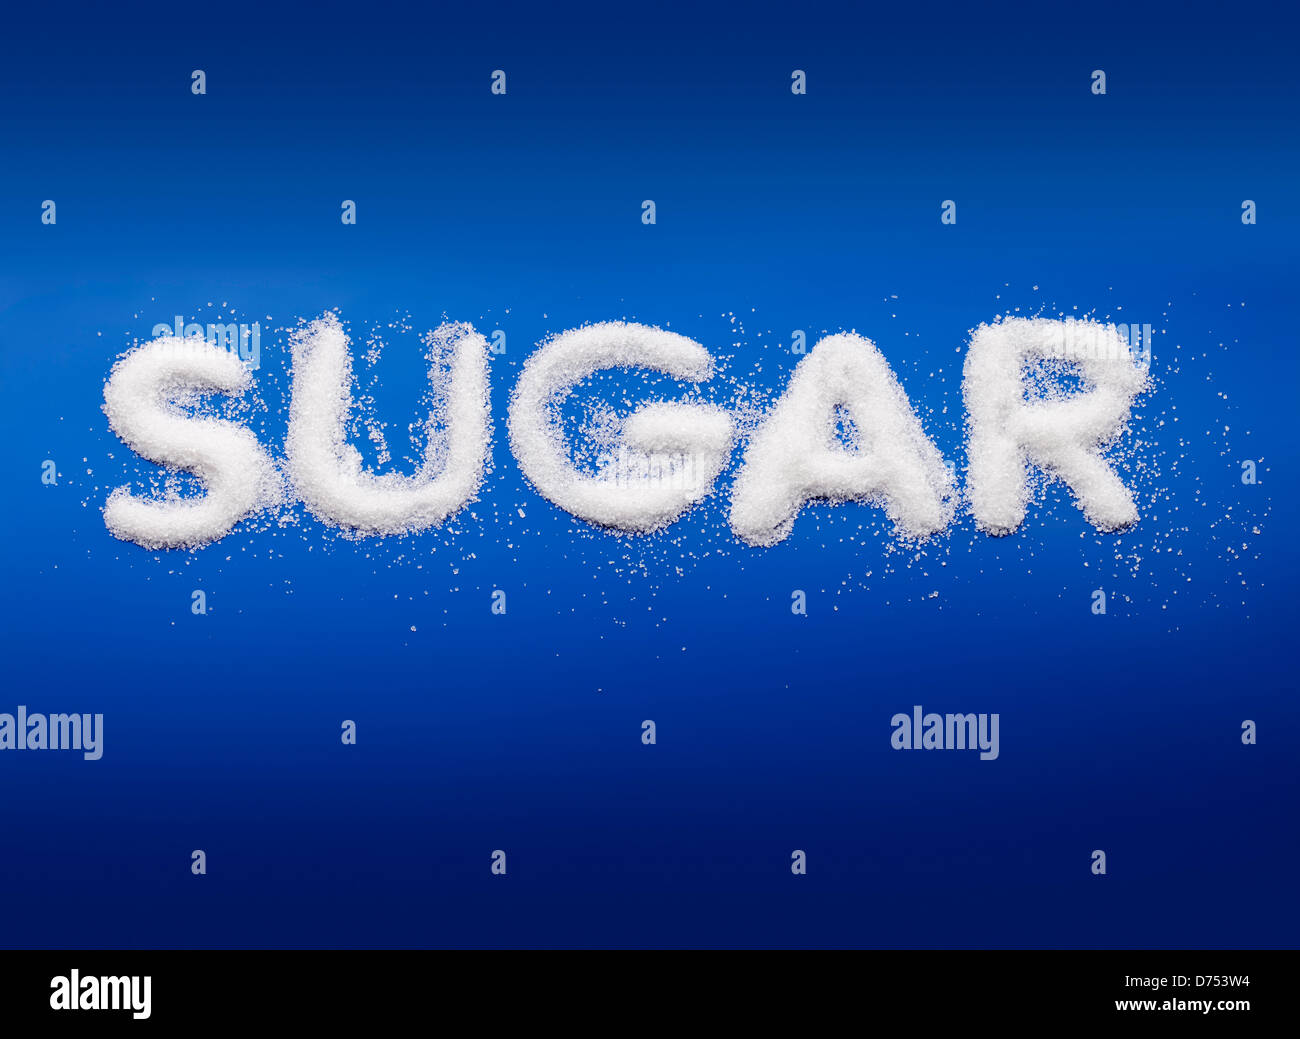 Word Sugar written with real fine granulated sugar on blue background. Stock Photo